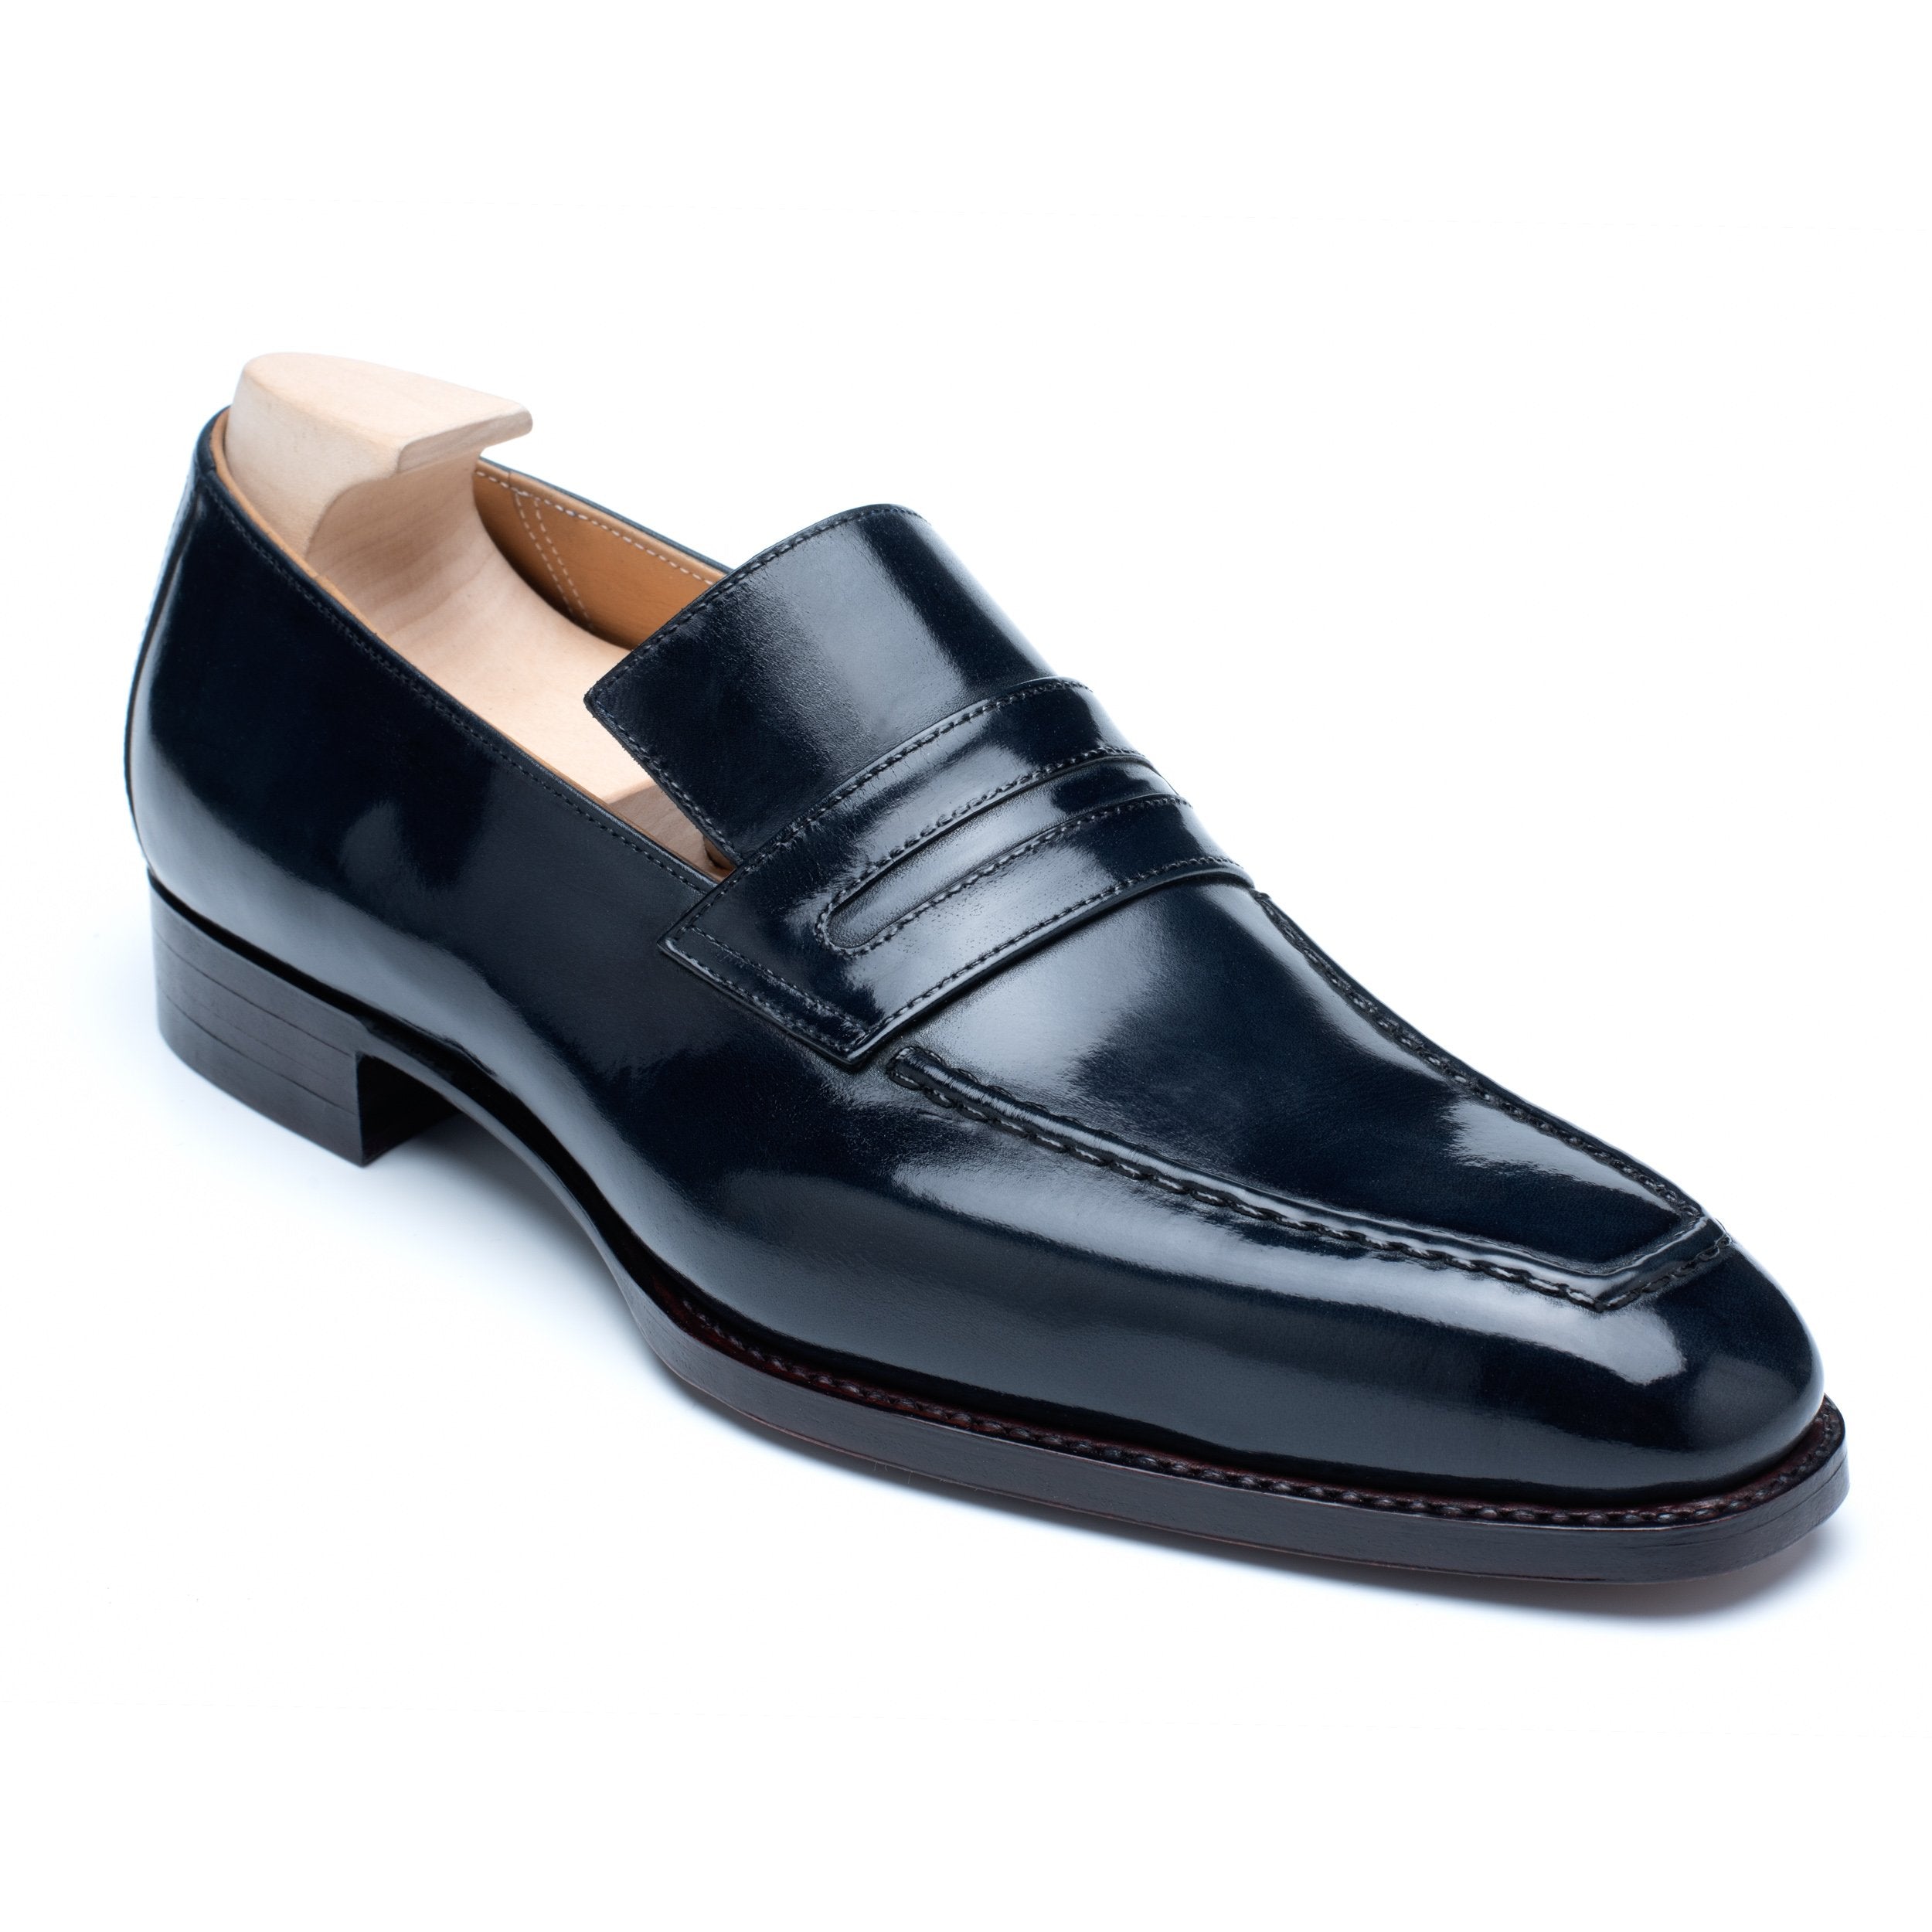 PASSUS SHOES "Anthony" Navy Blue Box Calf Leather Loafers 9 42 PASSUS SHOES